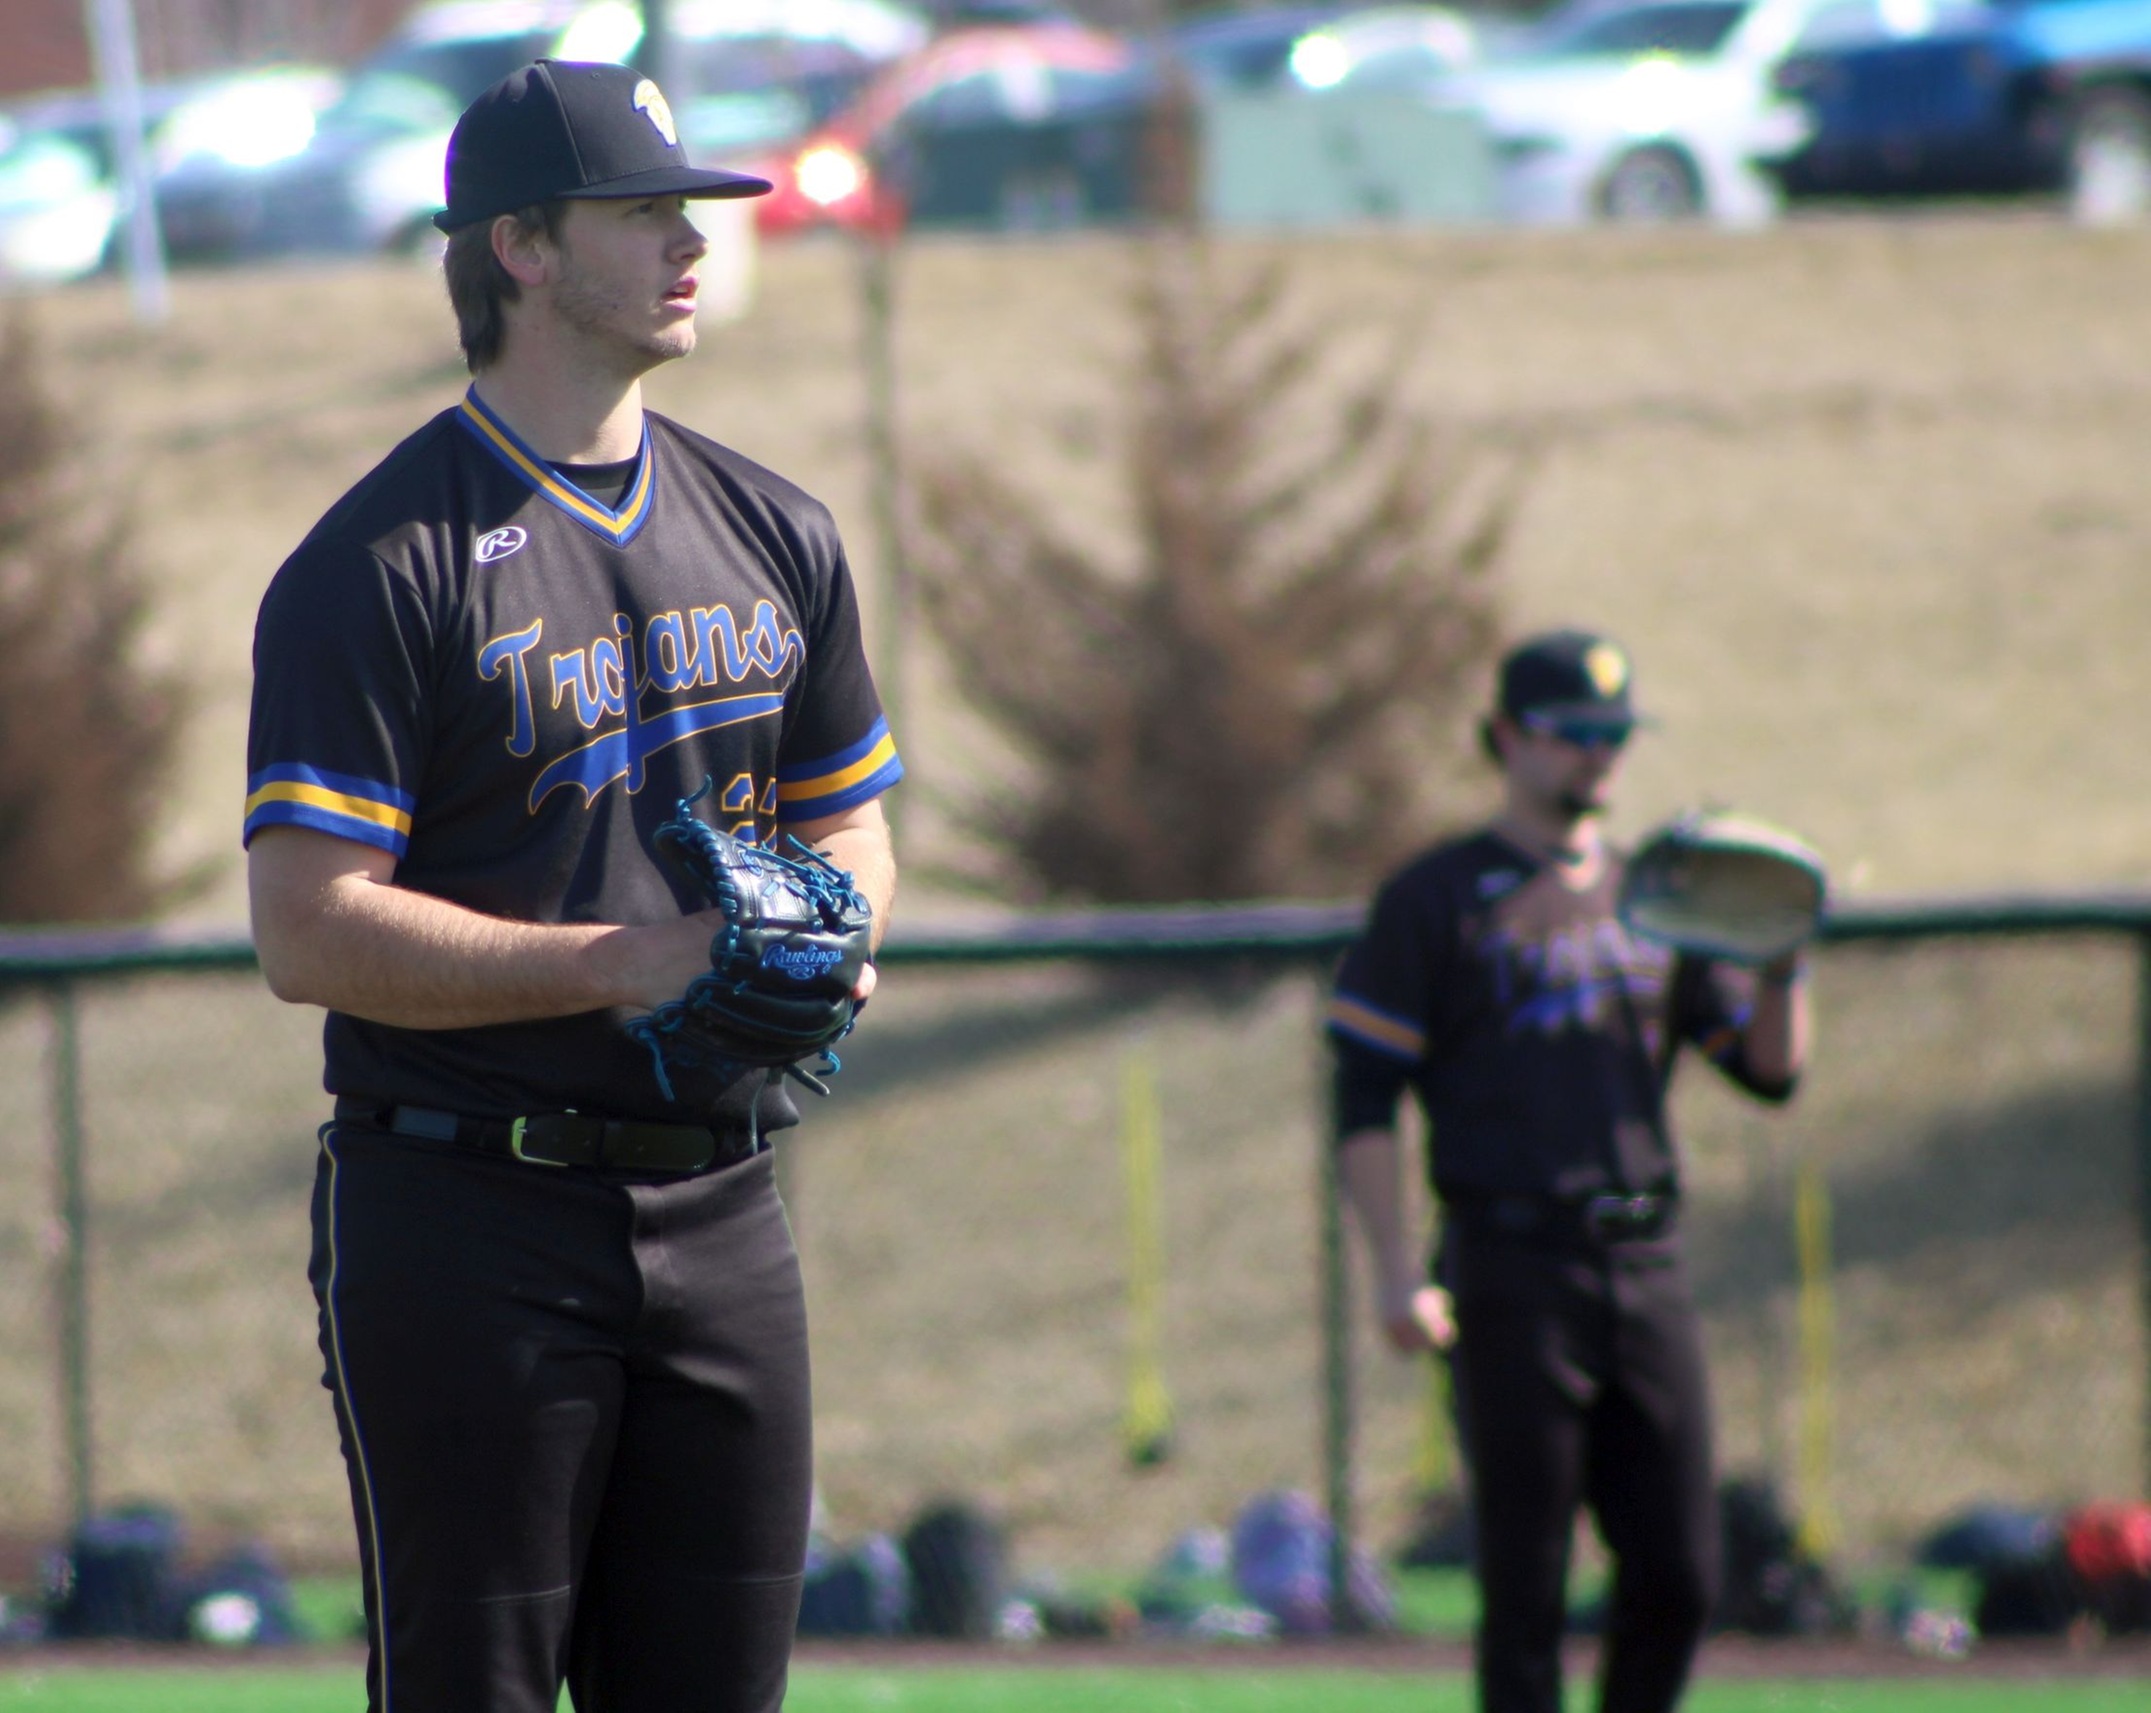 NIACC's Ben Rosin was selected as the NJCAA Division II pitcher of the week for the week of April 25-May 1.